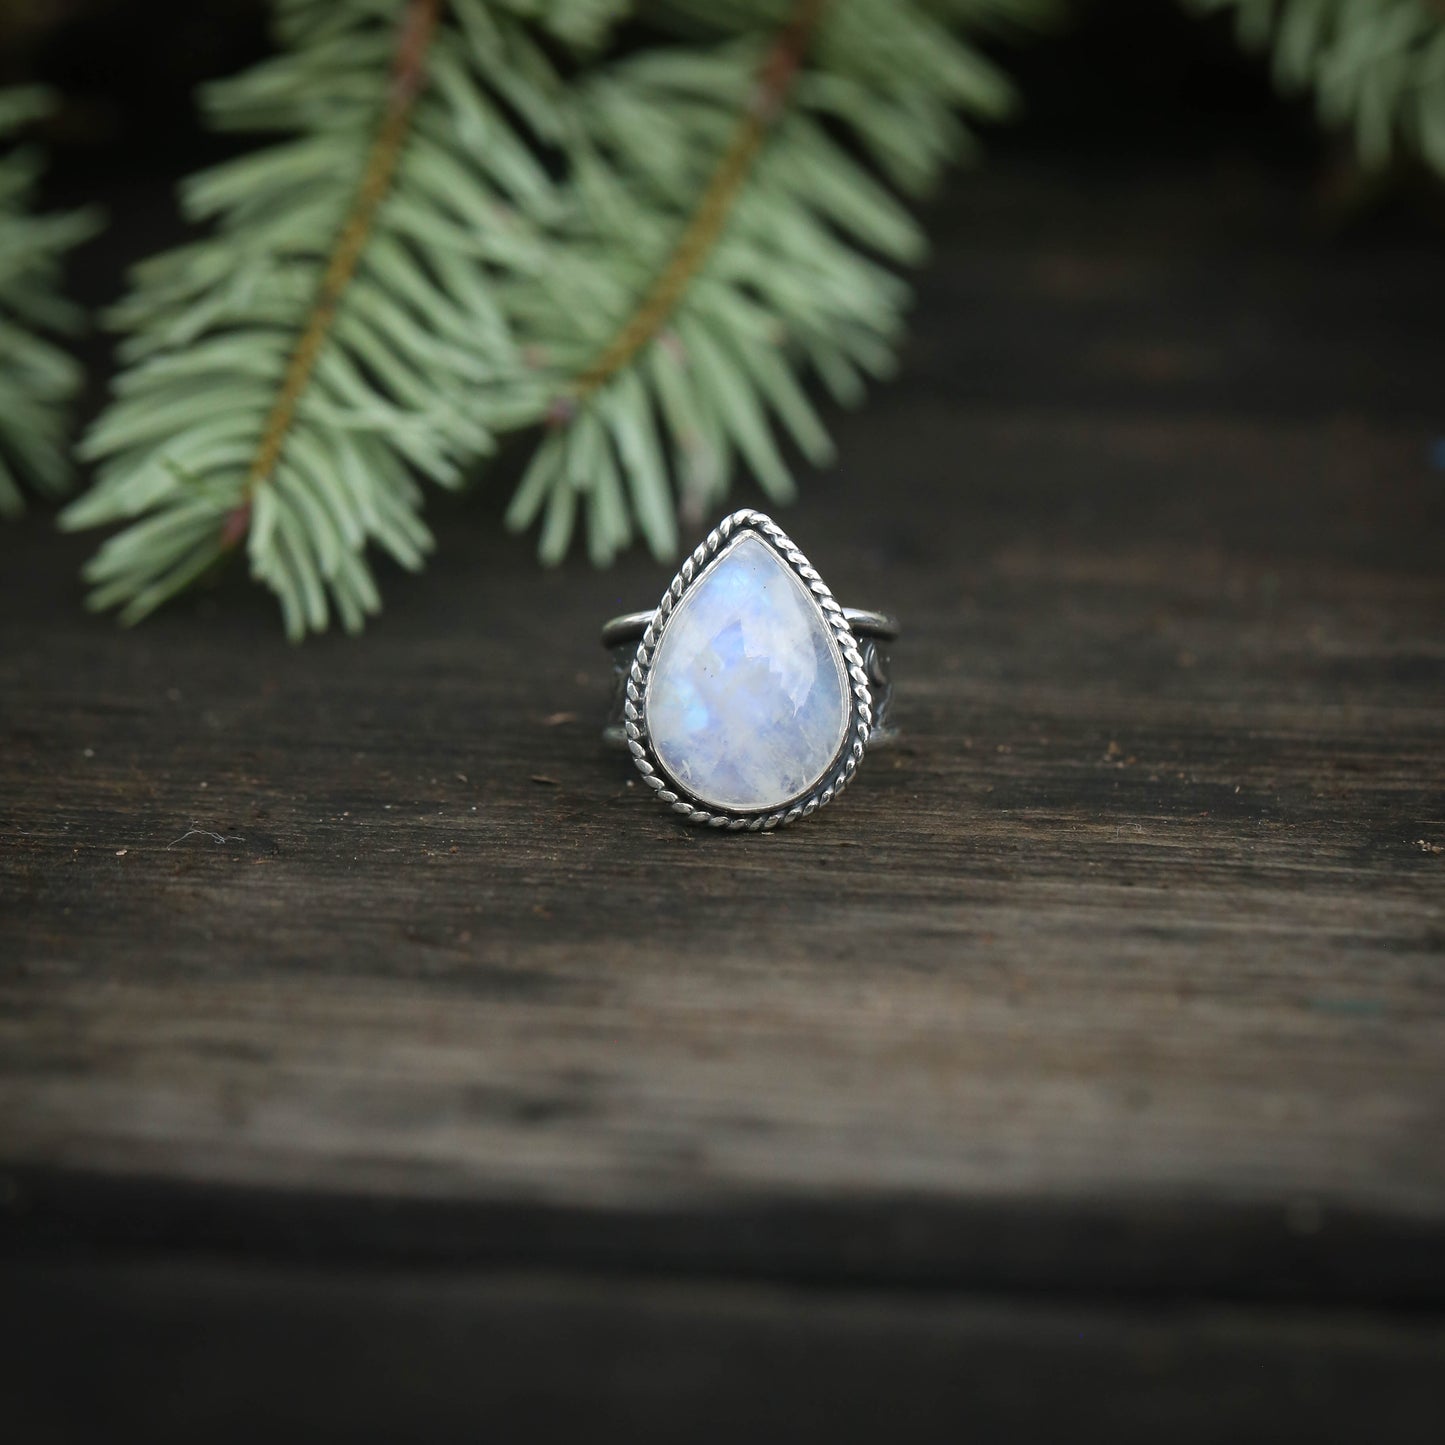 Size 7 Moonstone Ring with Mountain Landscape Band